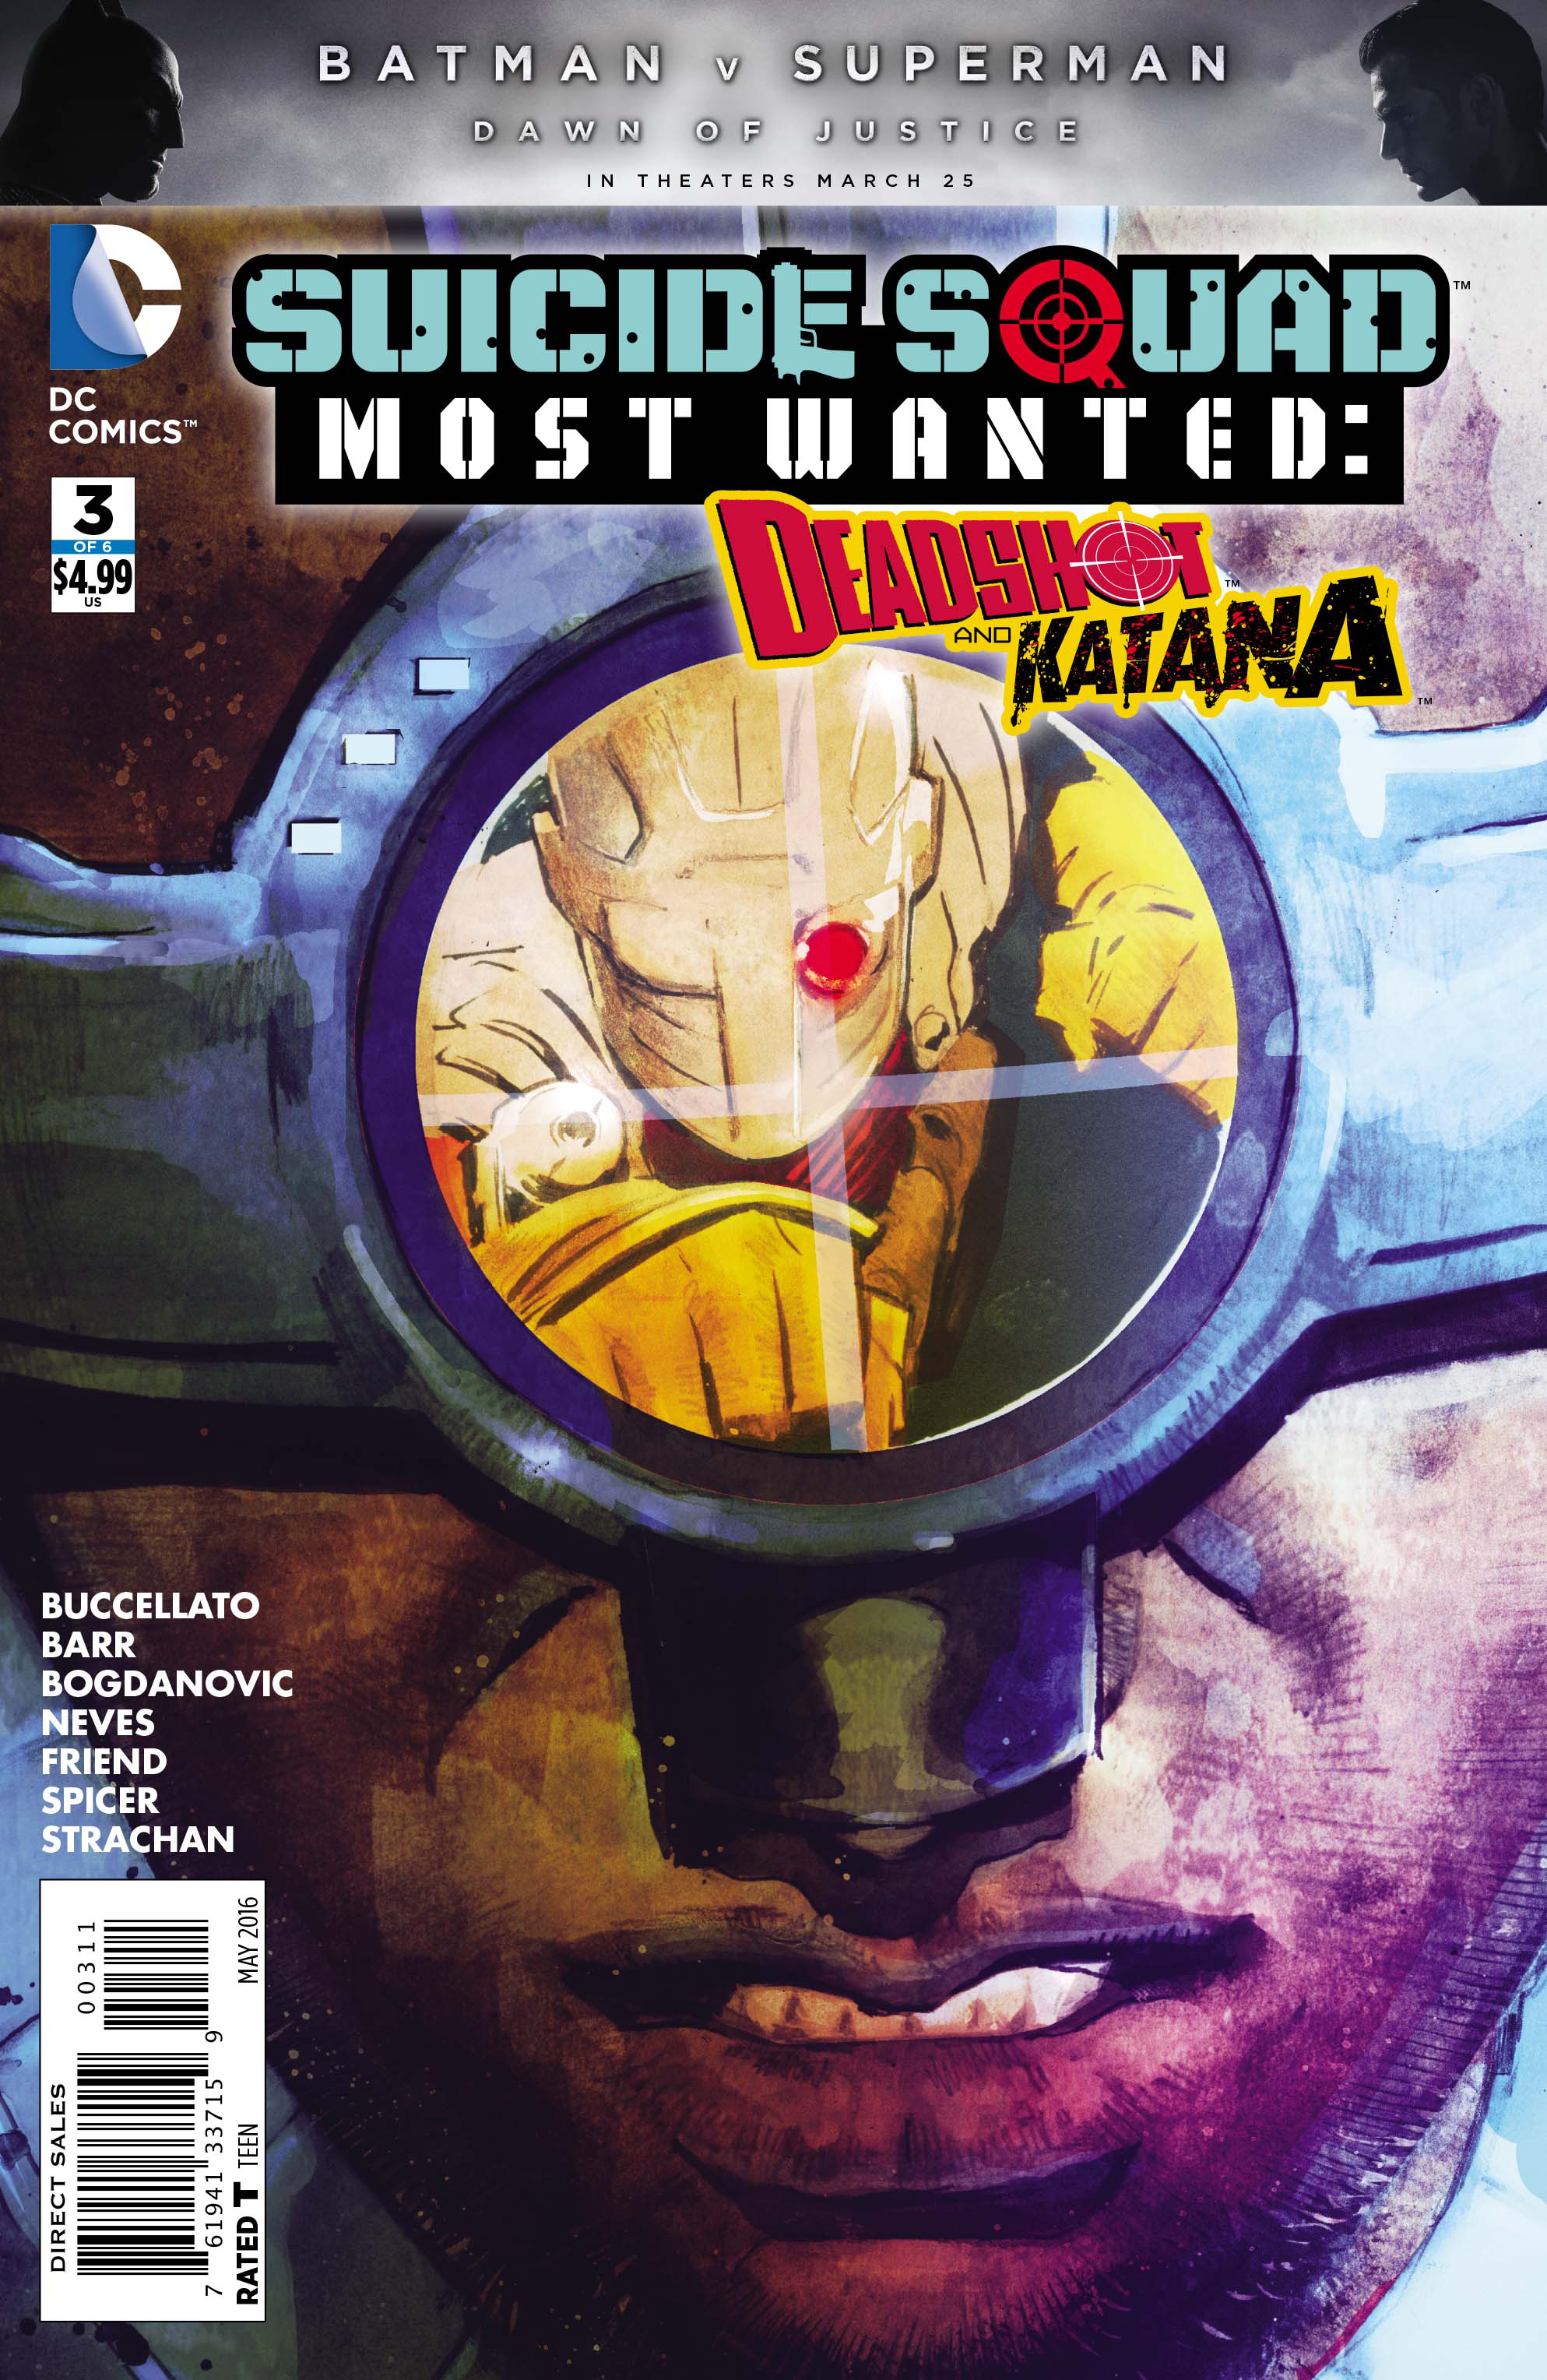 SUICIDE SQUAD MOST WANTED DEADSHOT KATANA #3 (OF 6)